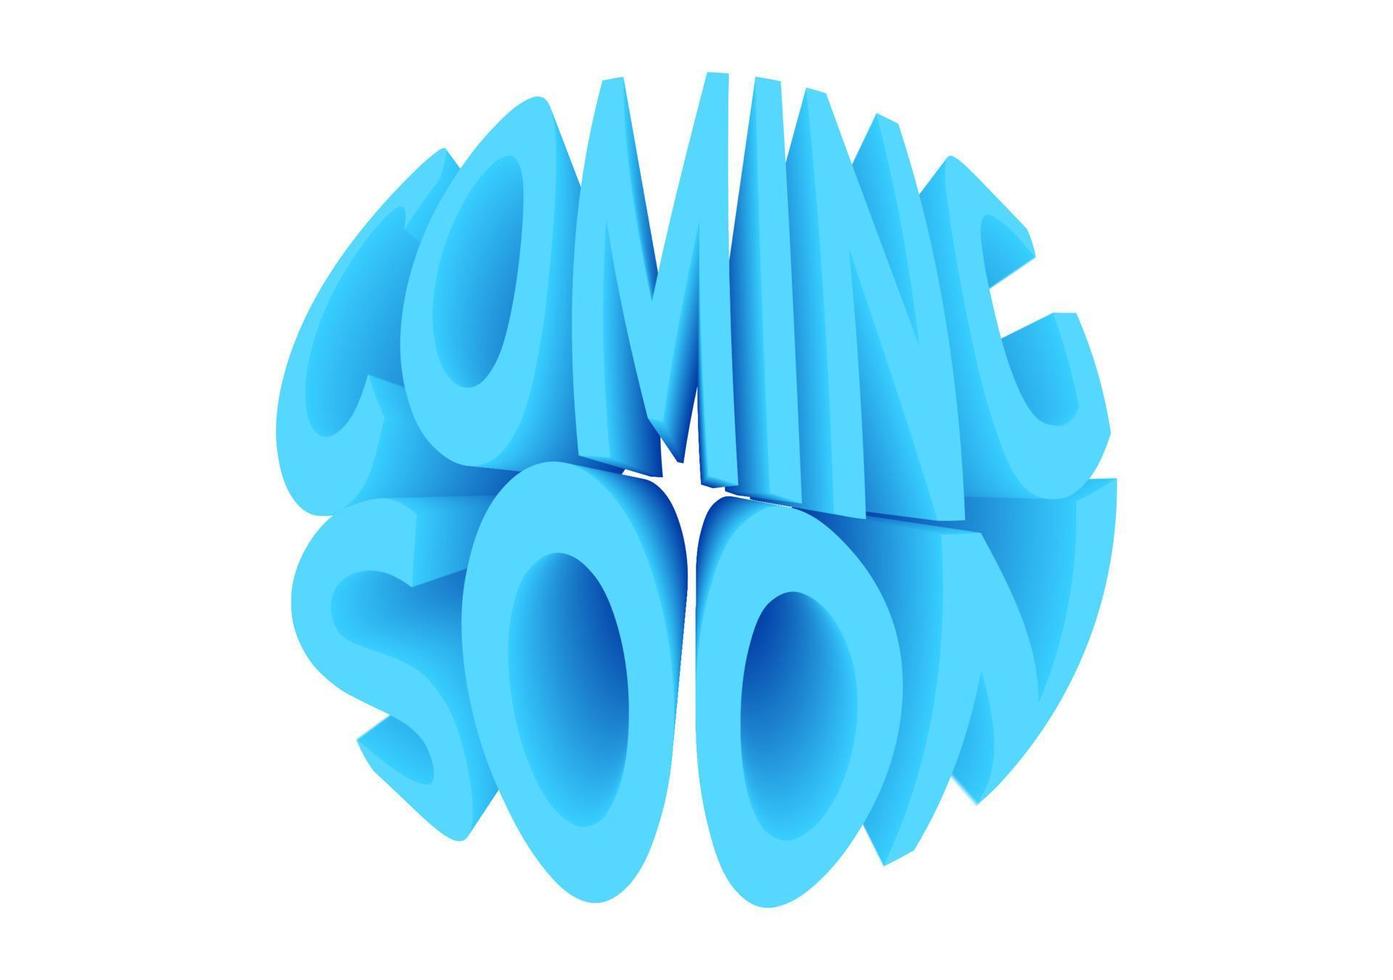 3D Coming Soon Banner Background Illustration vector